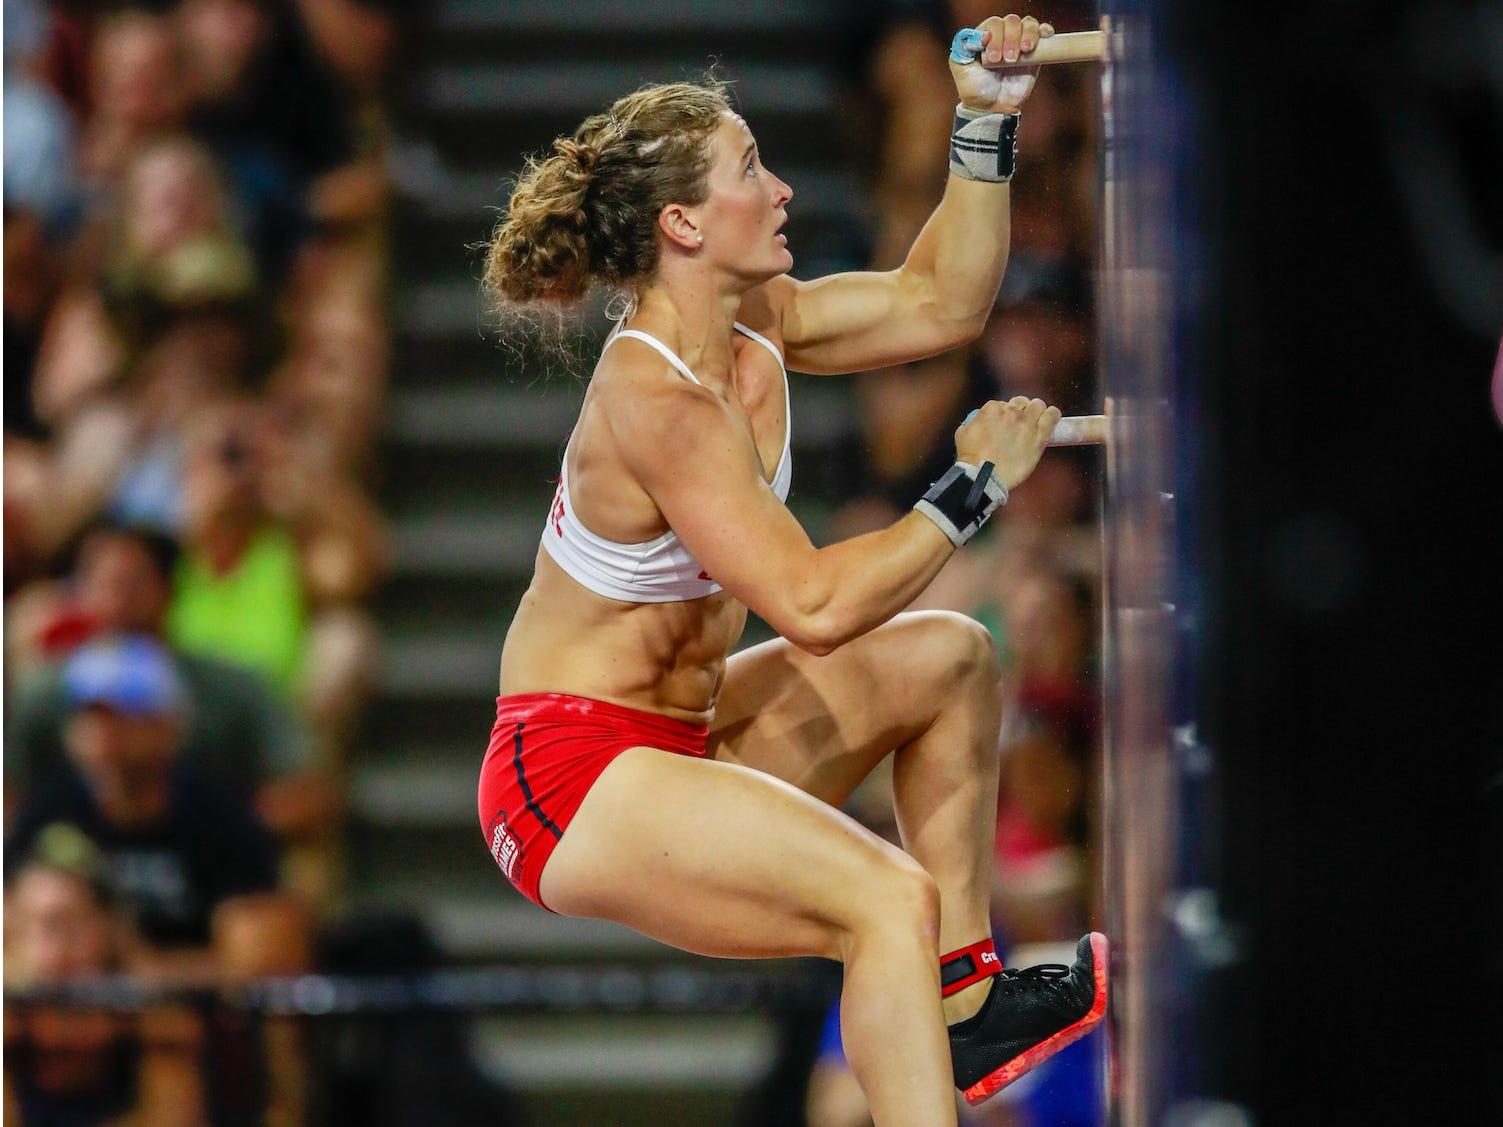 The 5 principles that helped Tia-Clair Toomey become the fittest woman in t...